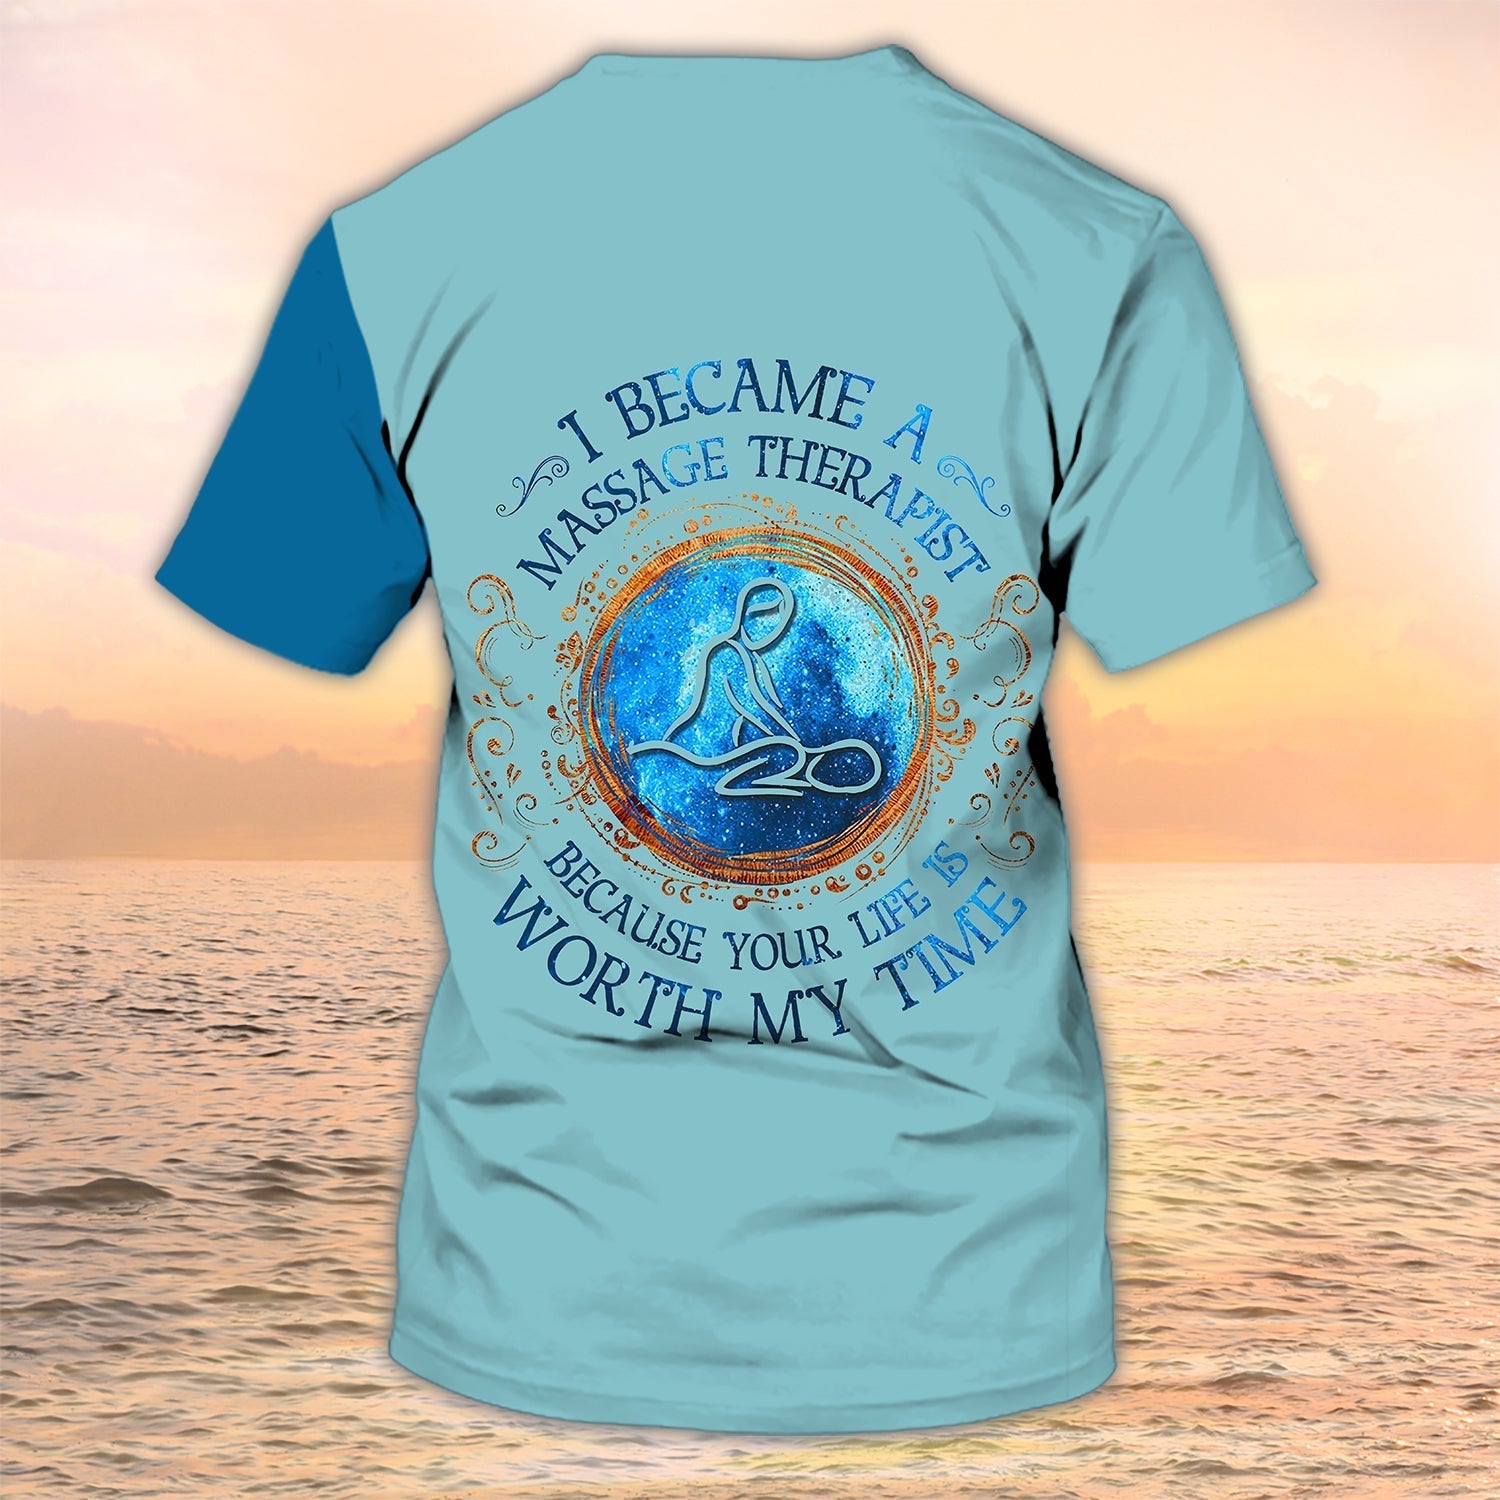 Personalized 3D Shirt For Massage Therapist/ Became A Massage Therapist Shirt Massage Uniform Shirts Tad